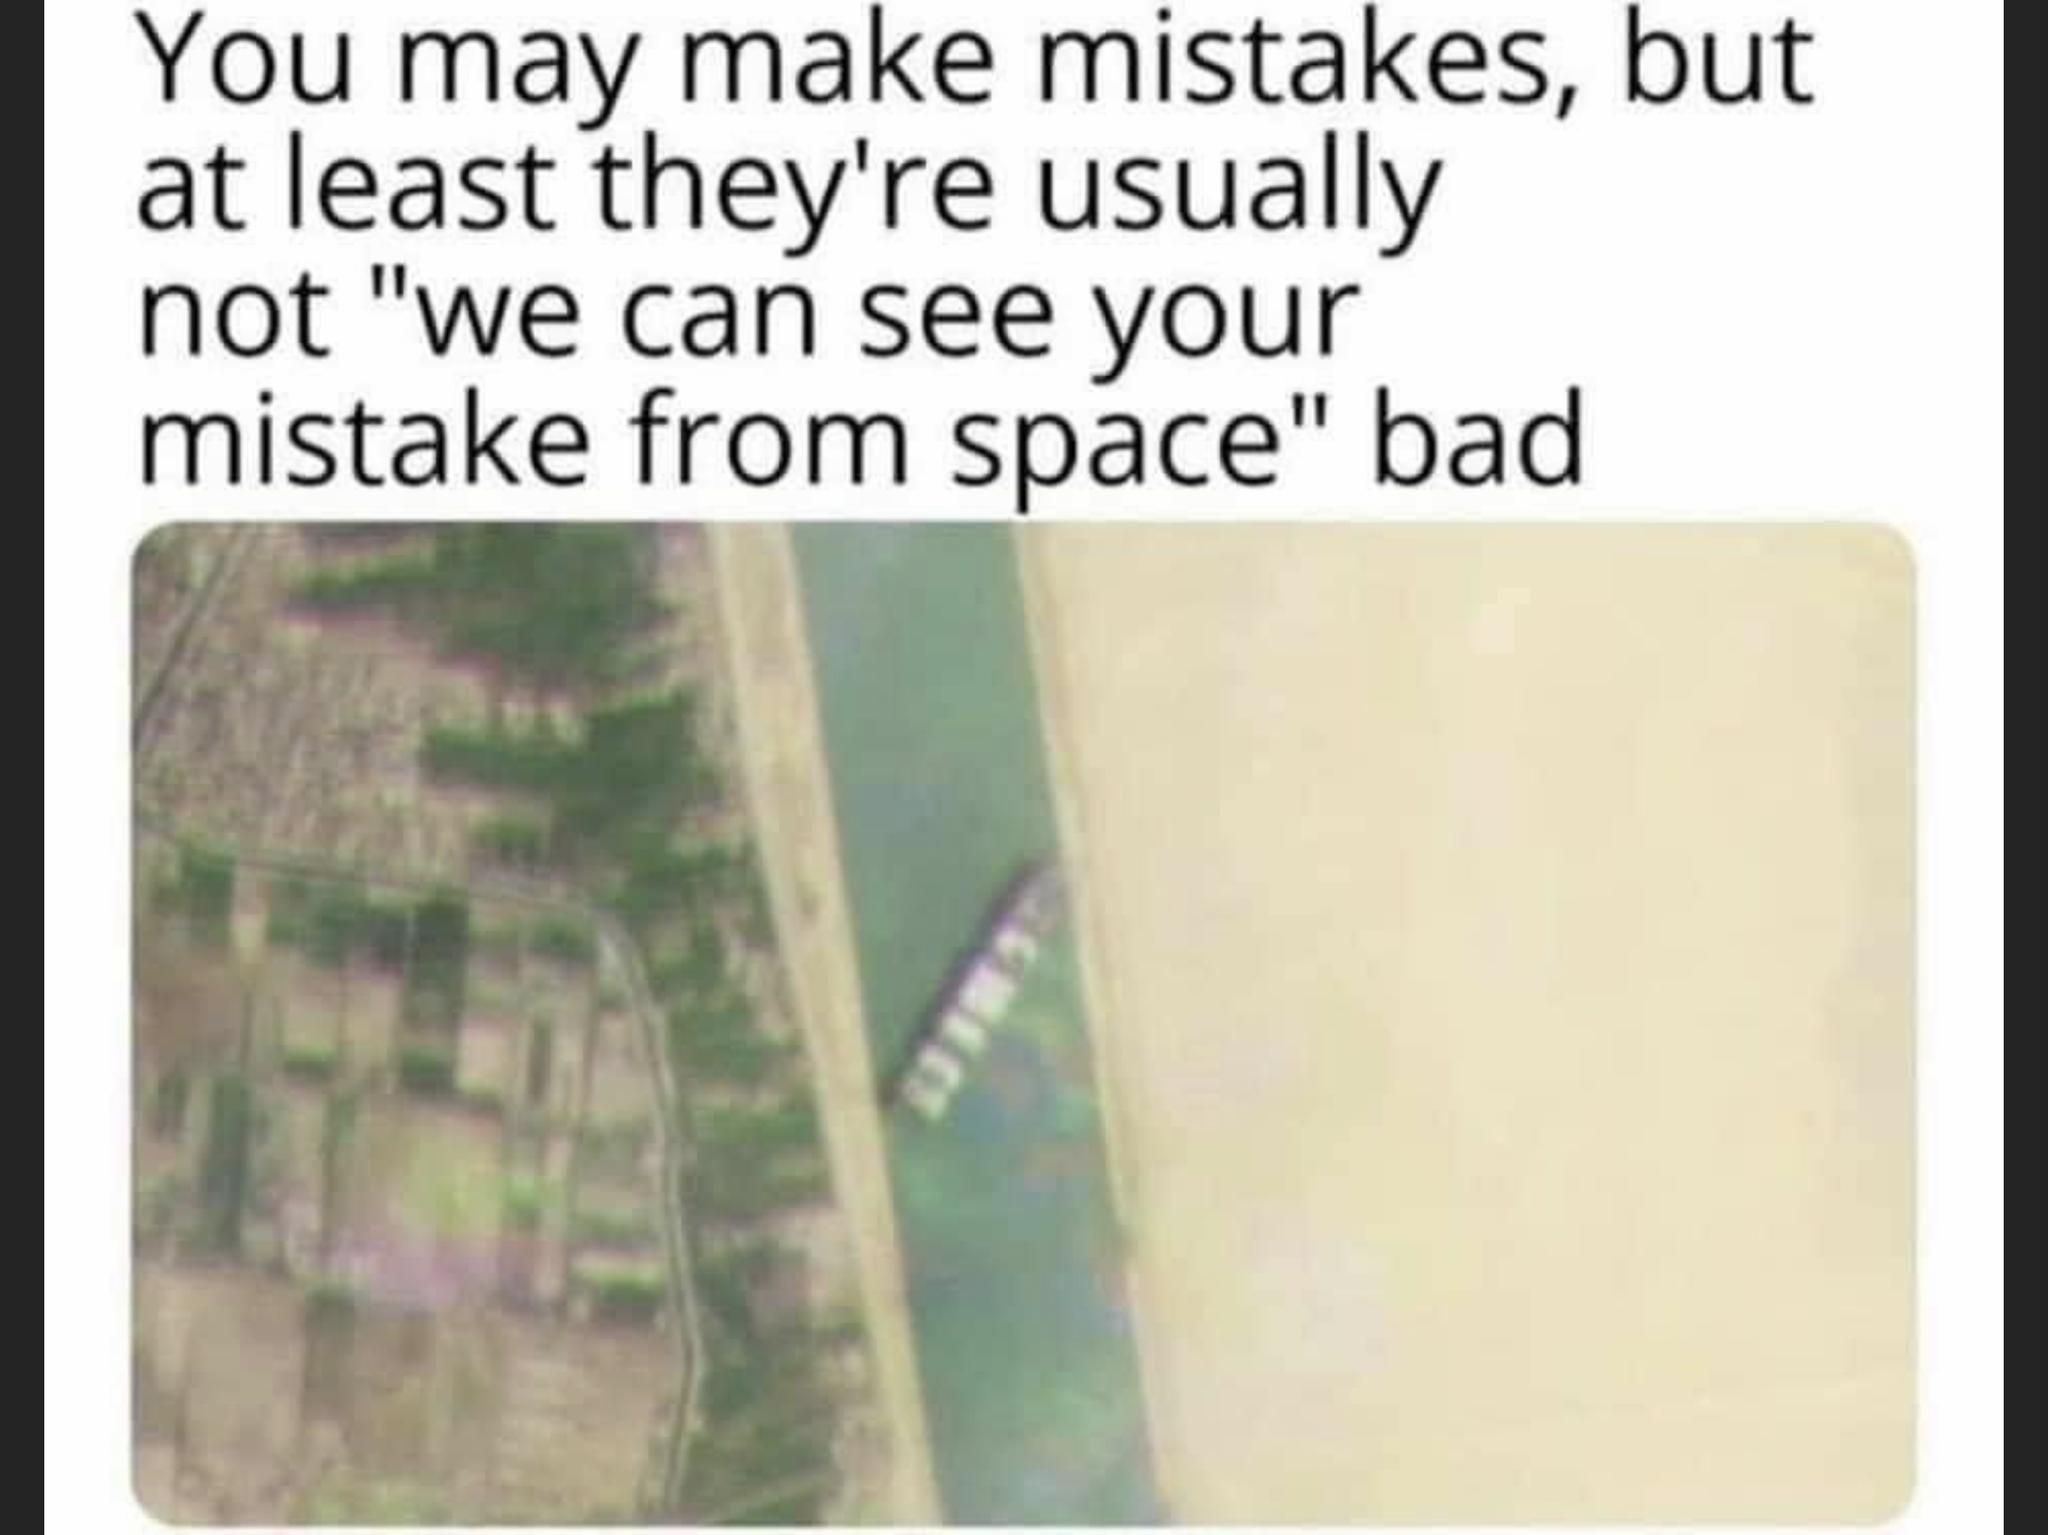 You may make mistakes, but at least they're usually not "we can see your mistake from space" bad.